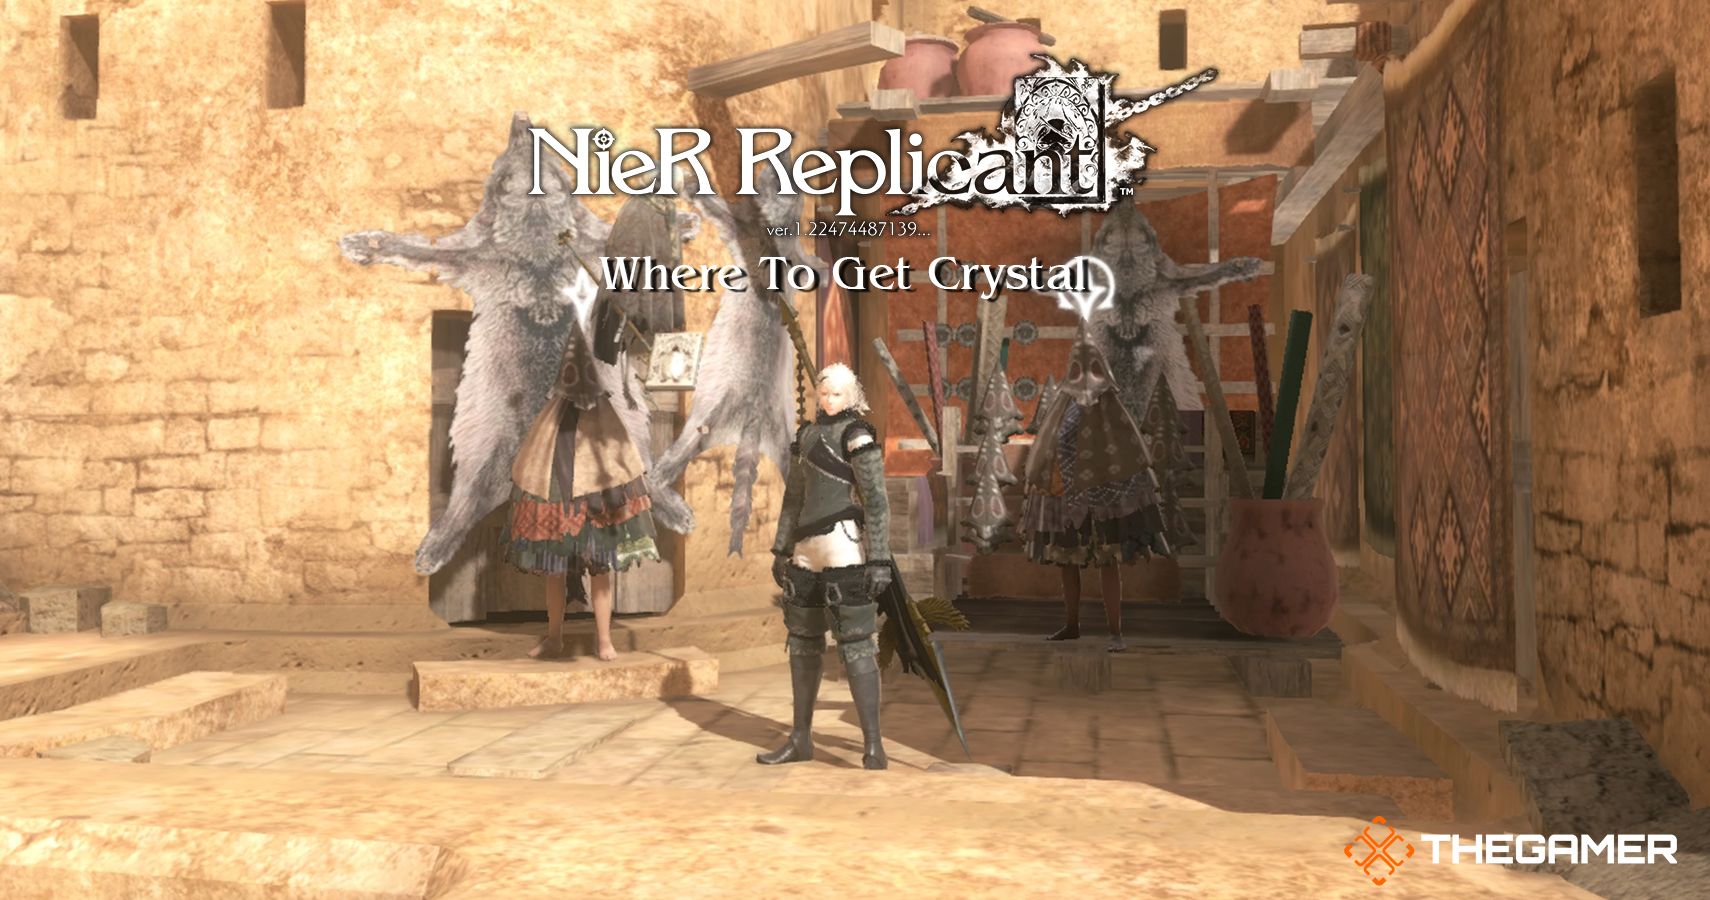 Where can I get crystal in Nier Replicant?